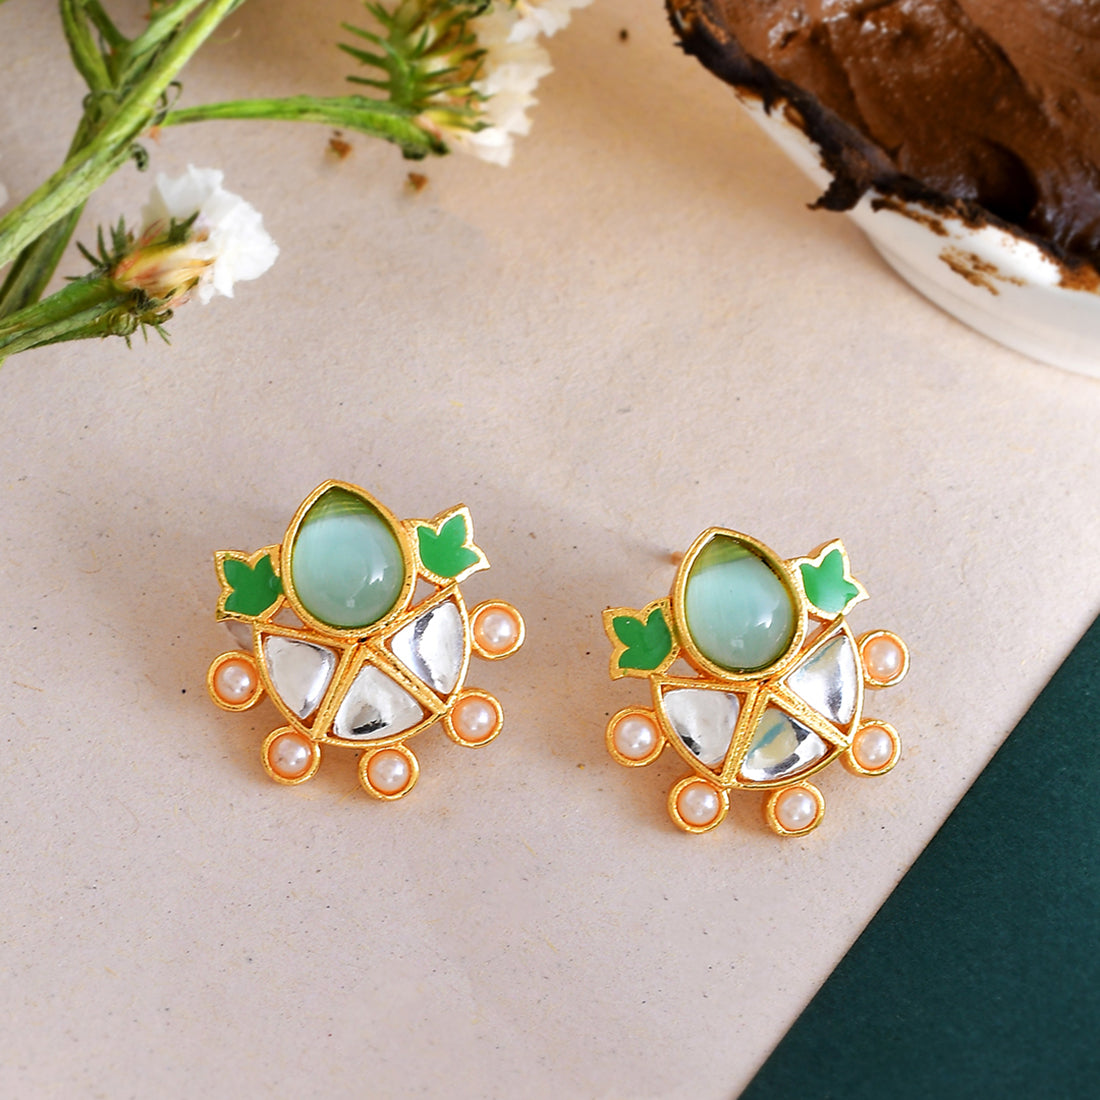 Discover 227+ green stone earrings